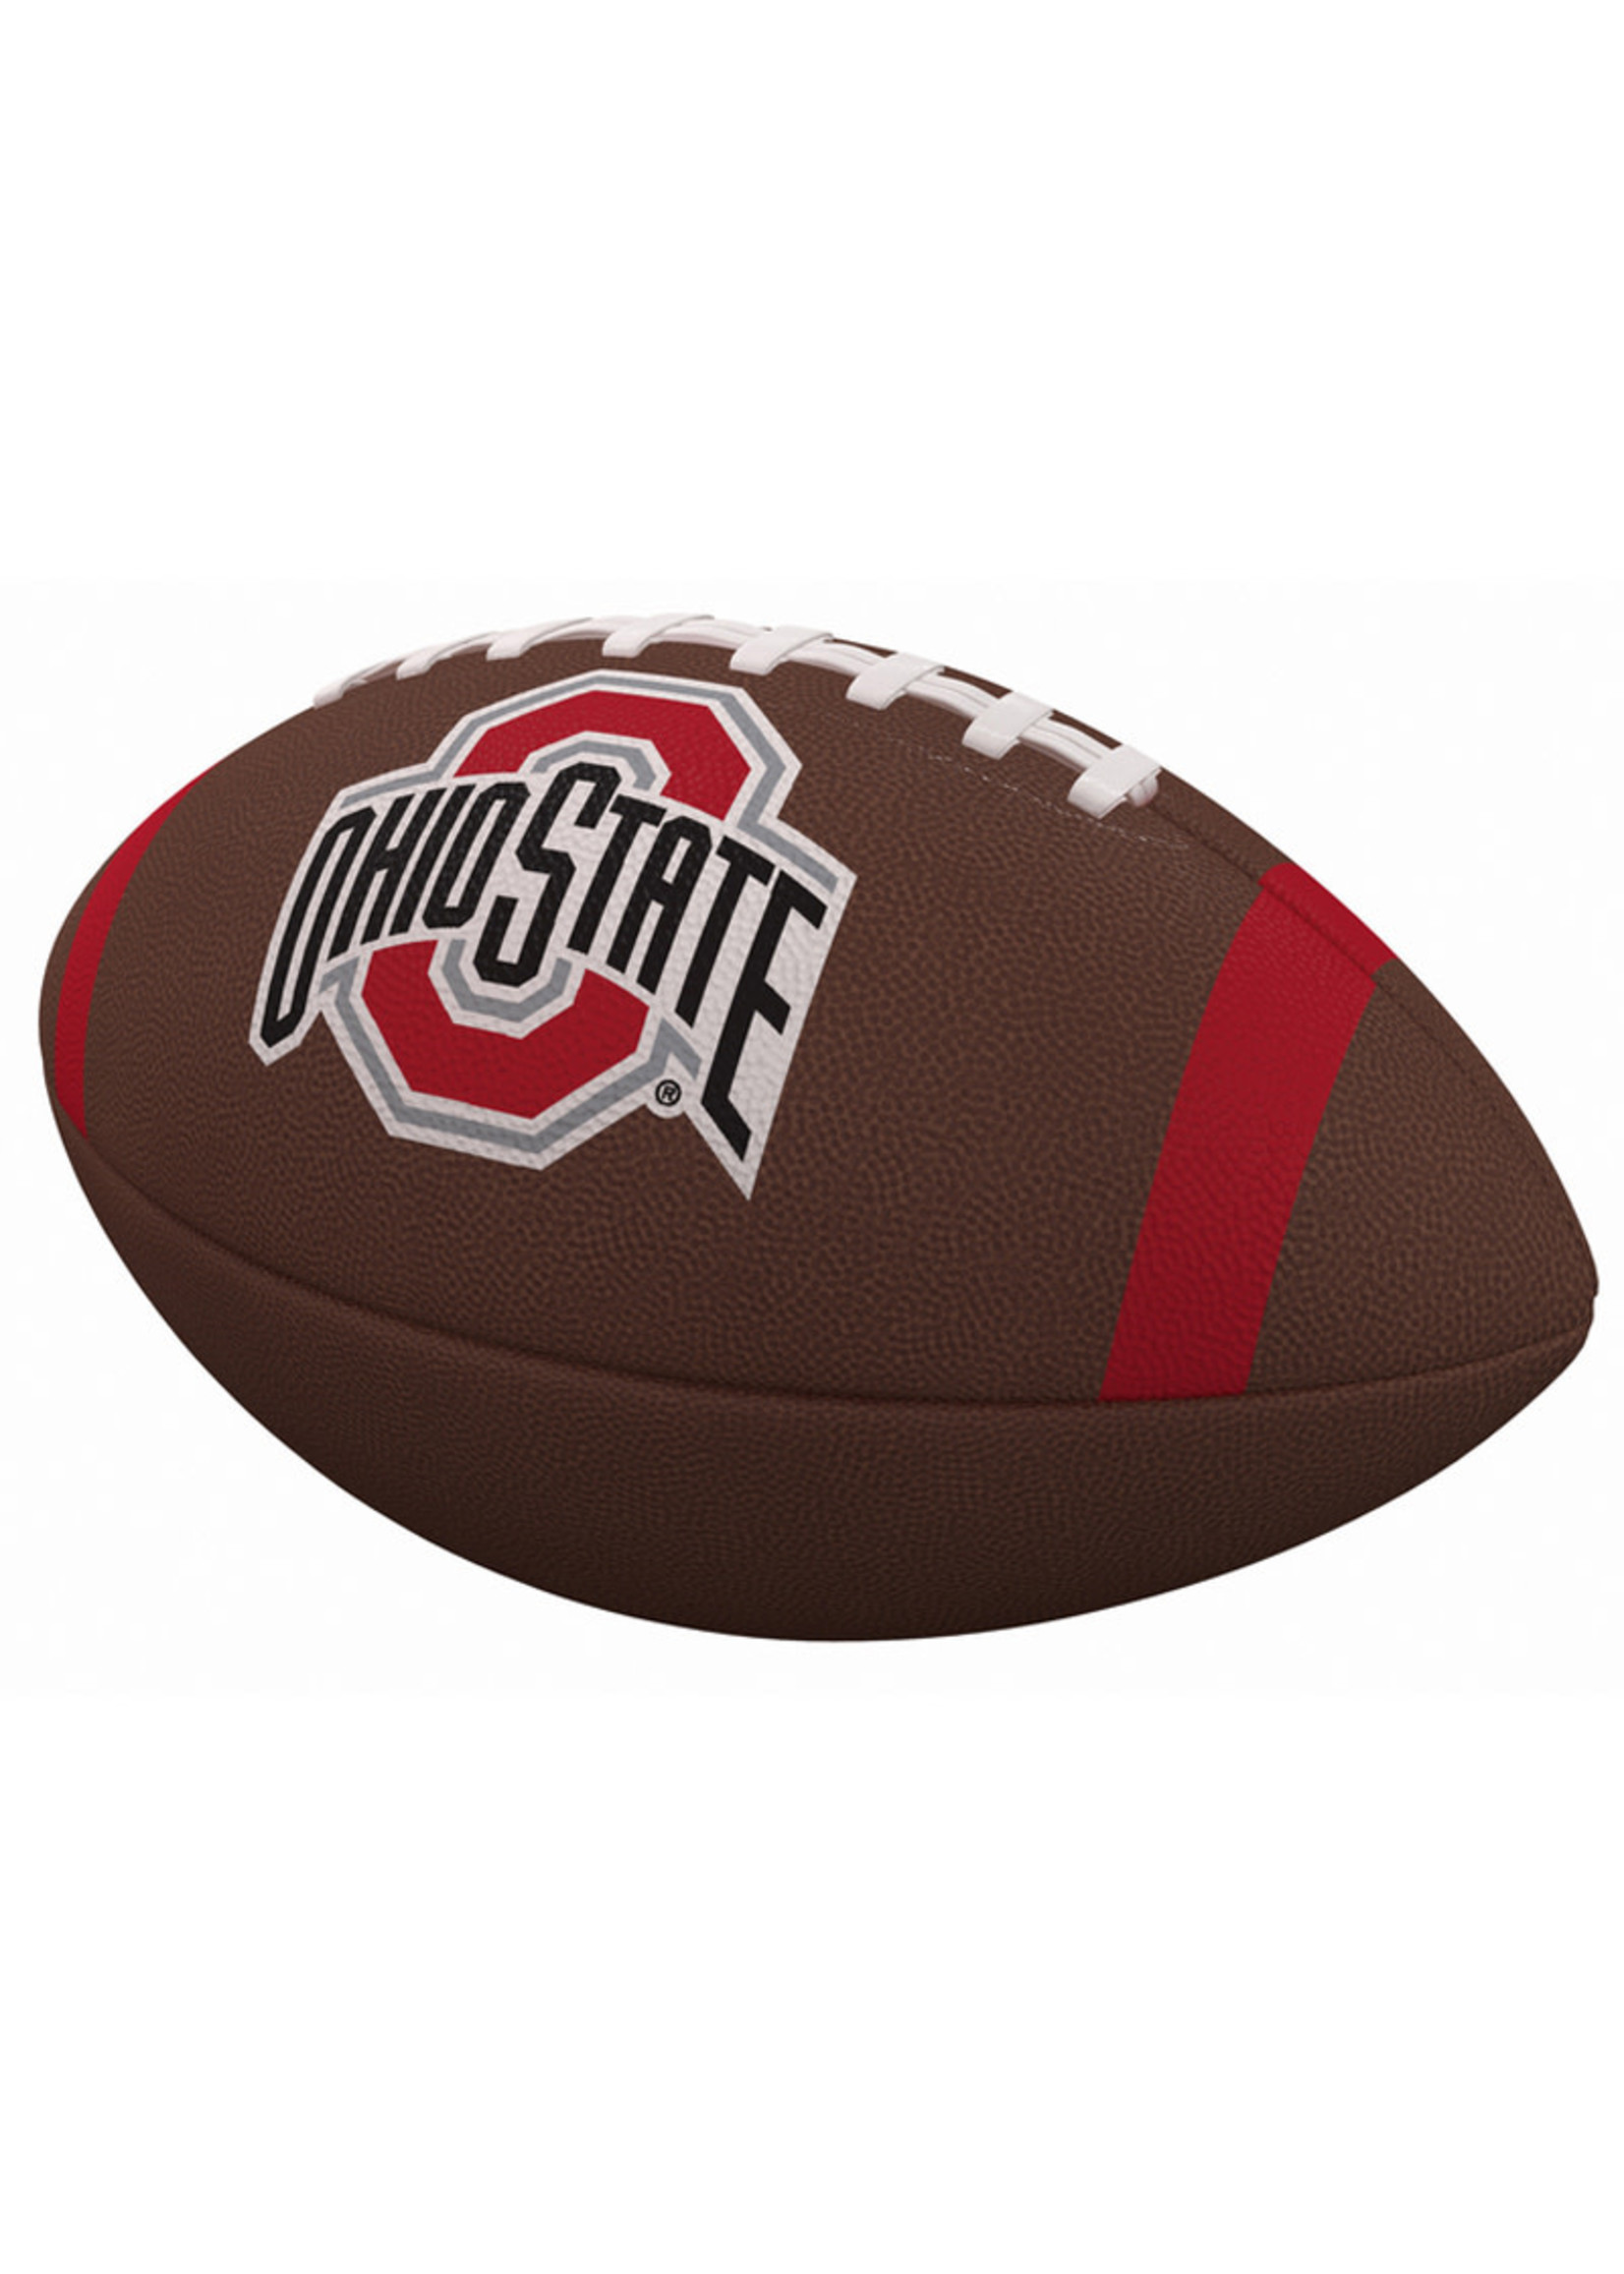 Ohio State Team Stripe Official-Size Composite Football